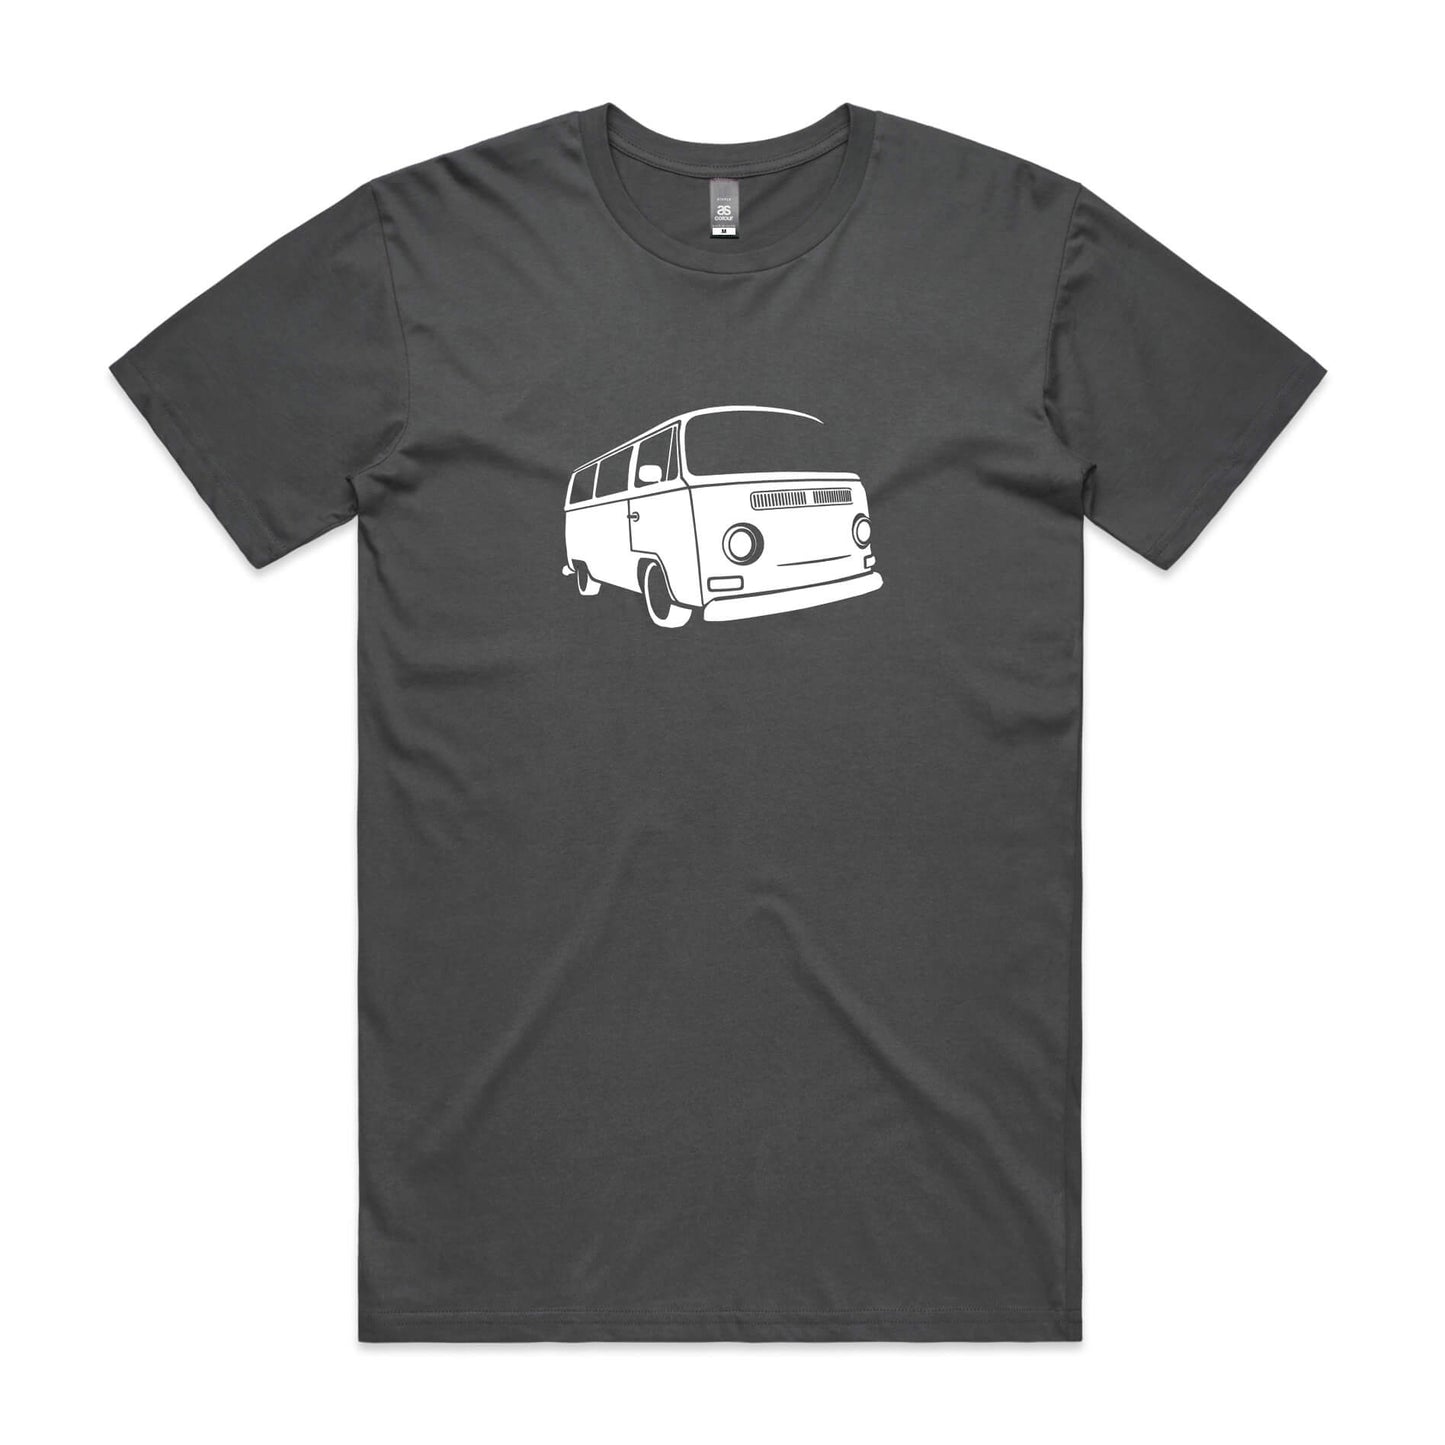 VW Kombi t-shirt in charcoal grey with white Volkswagen bus graphic